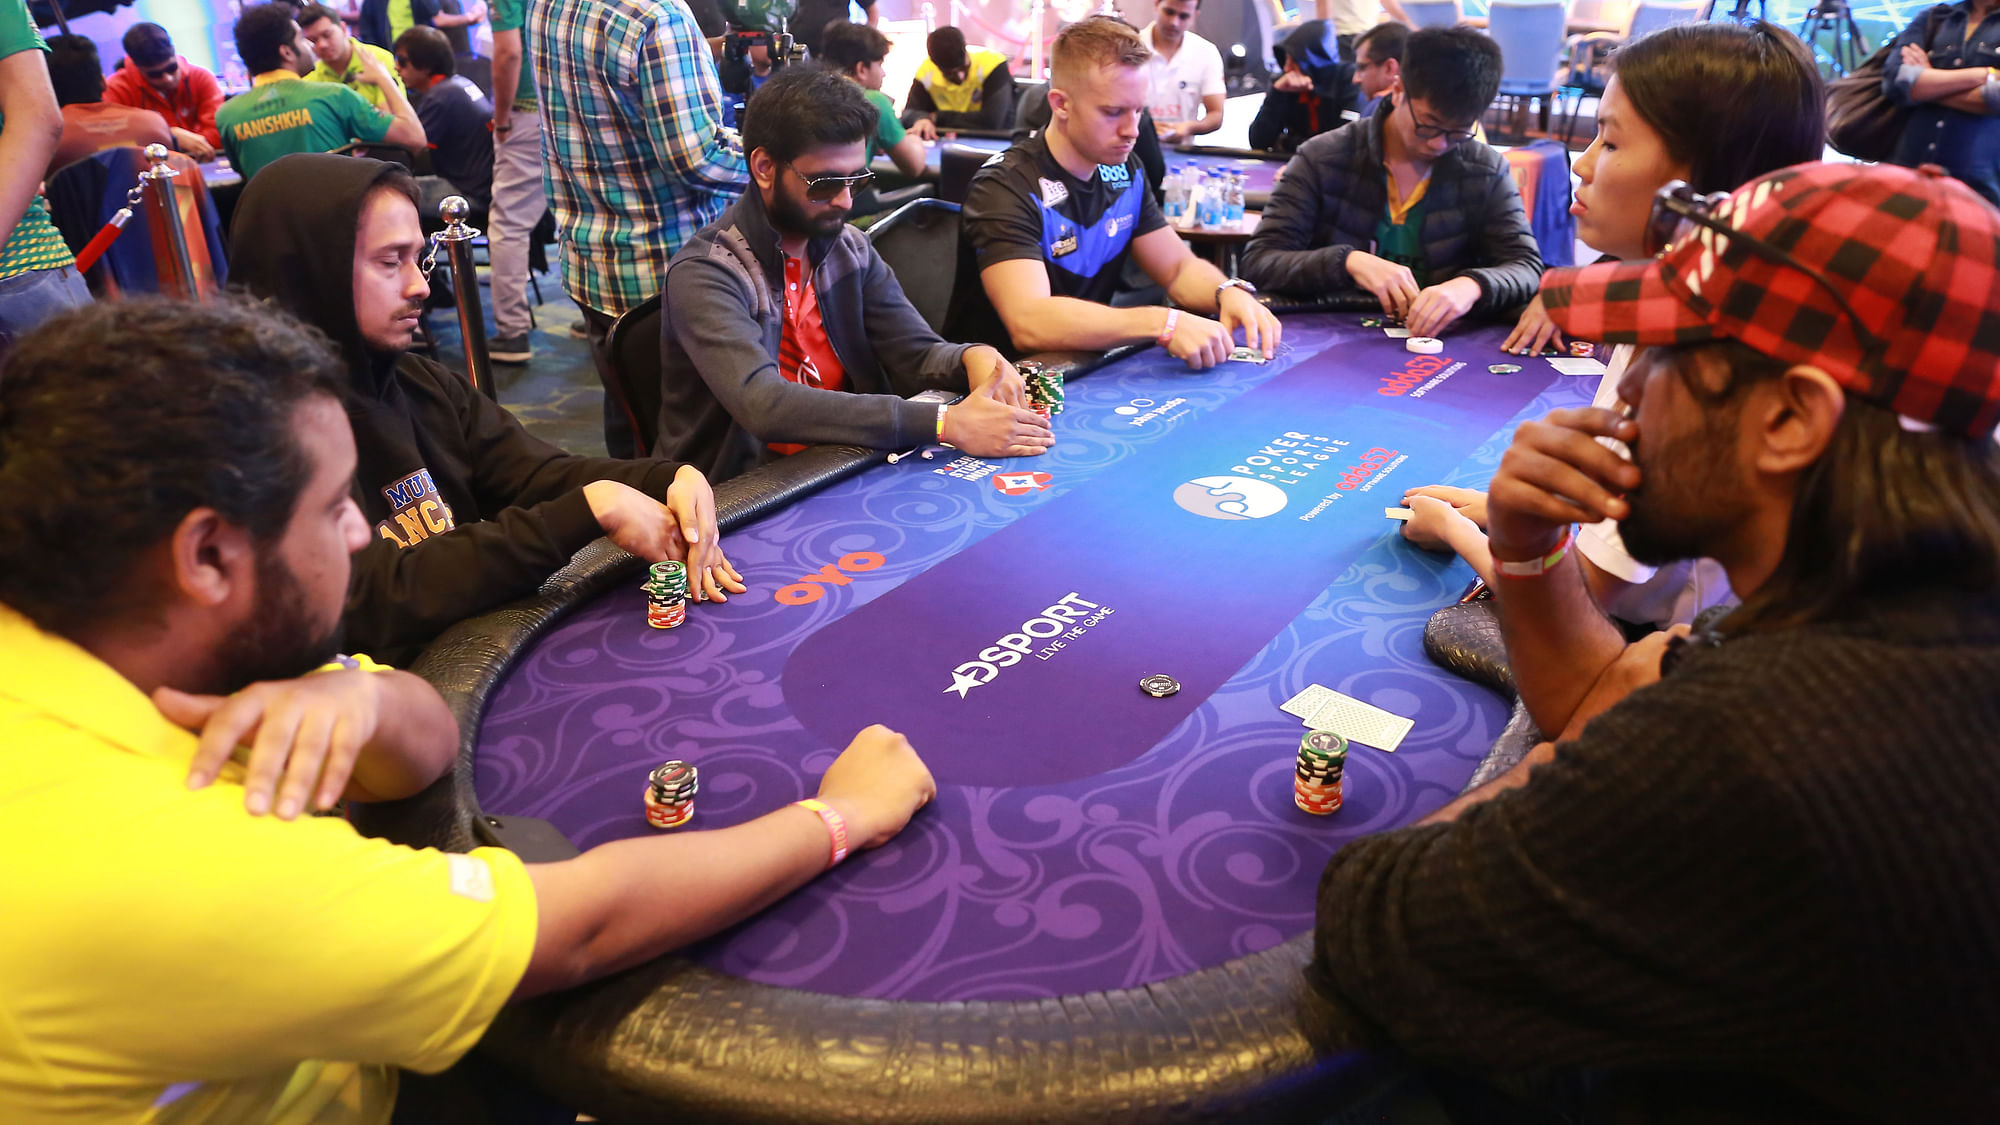 Poker Sports League saw over 20,000 participating to grab five spots in 11 teams.